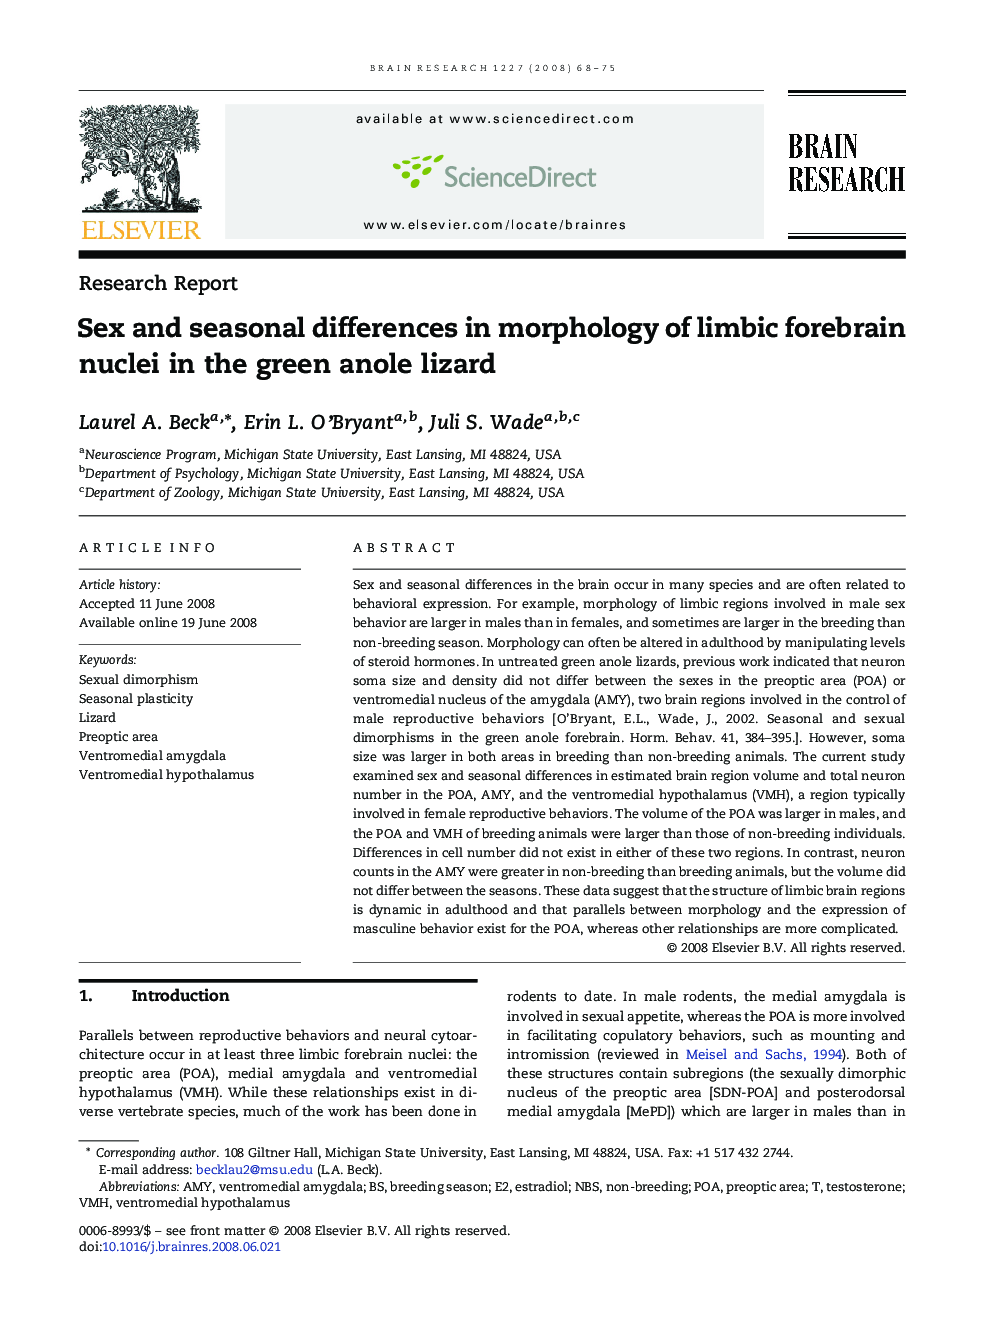 Sex and seasonal differences in morphology of limbic forebrain nuclei in the green anole lizard